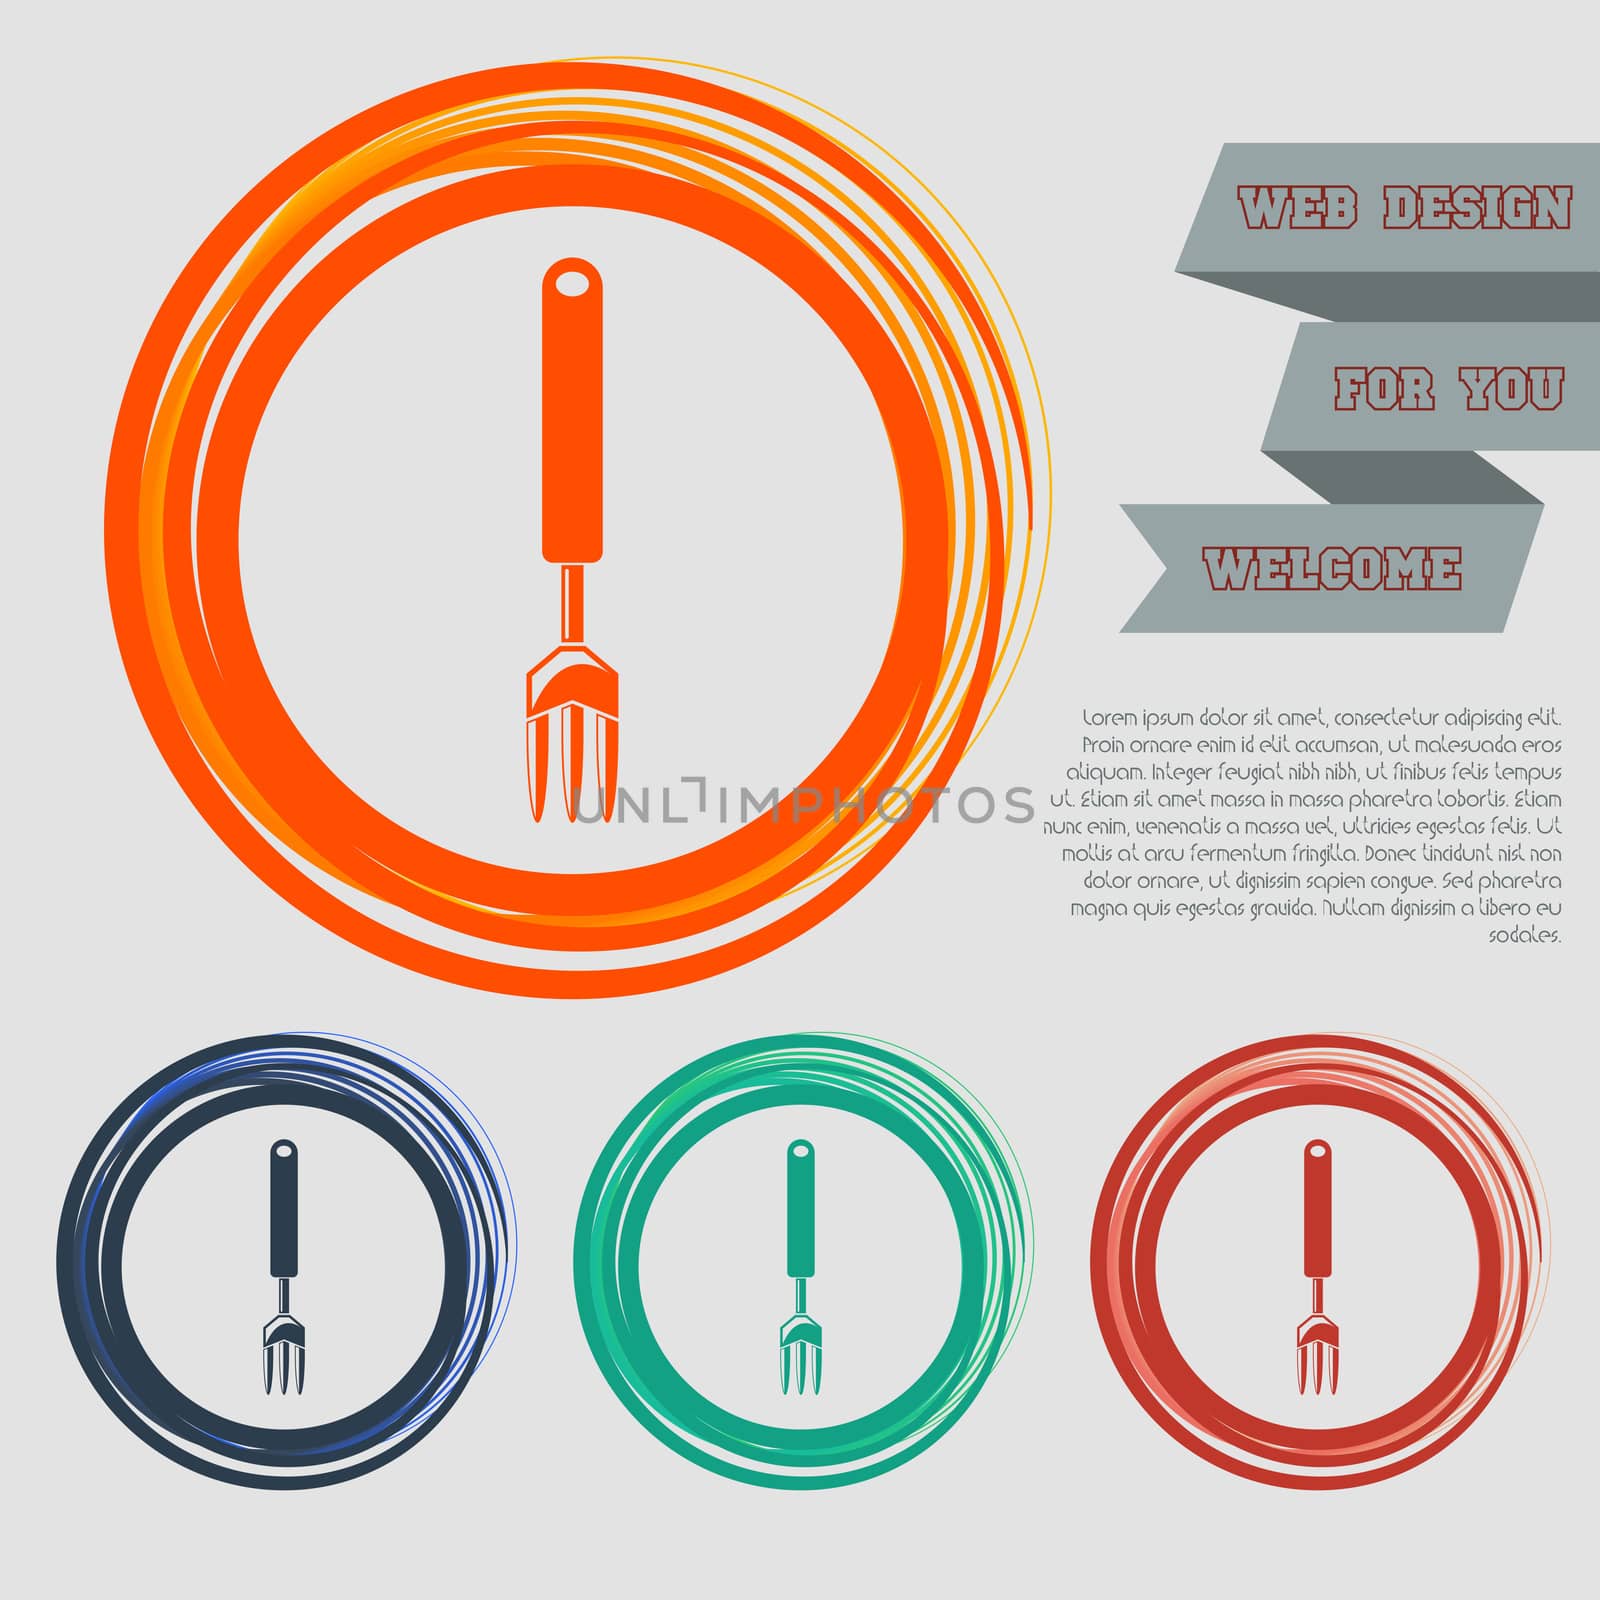 fork icon on the red, blue, green, orange buttons for your website and design with space text. illustration